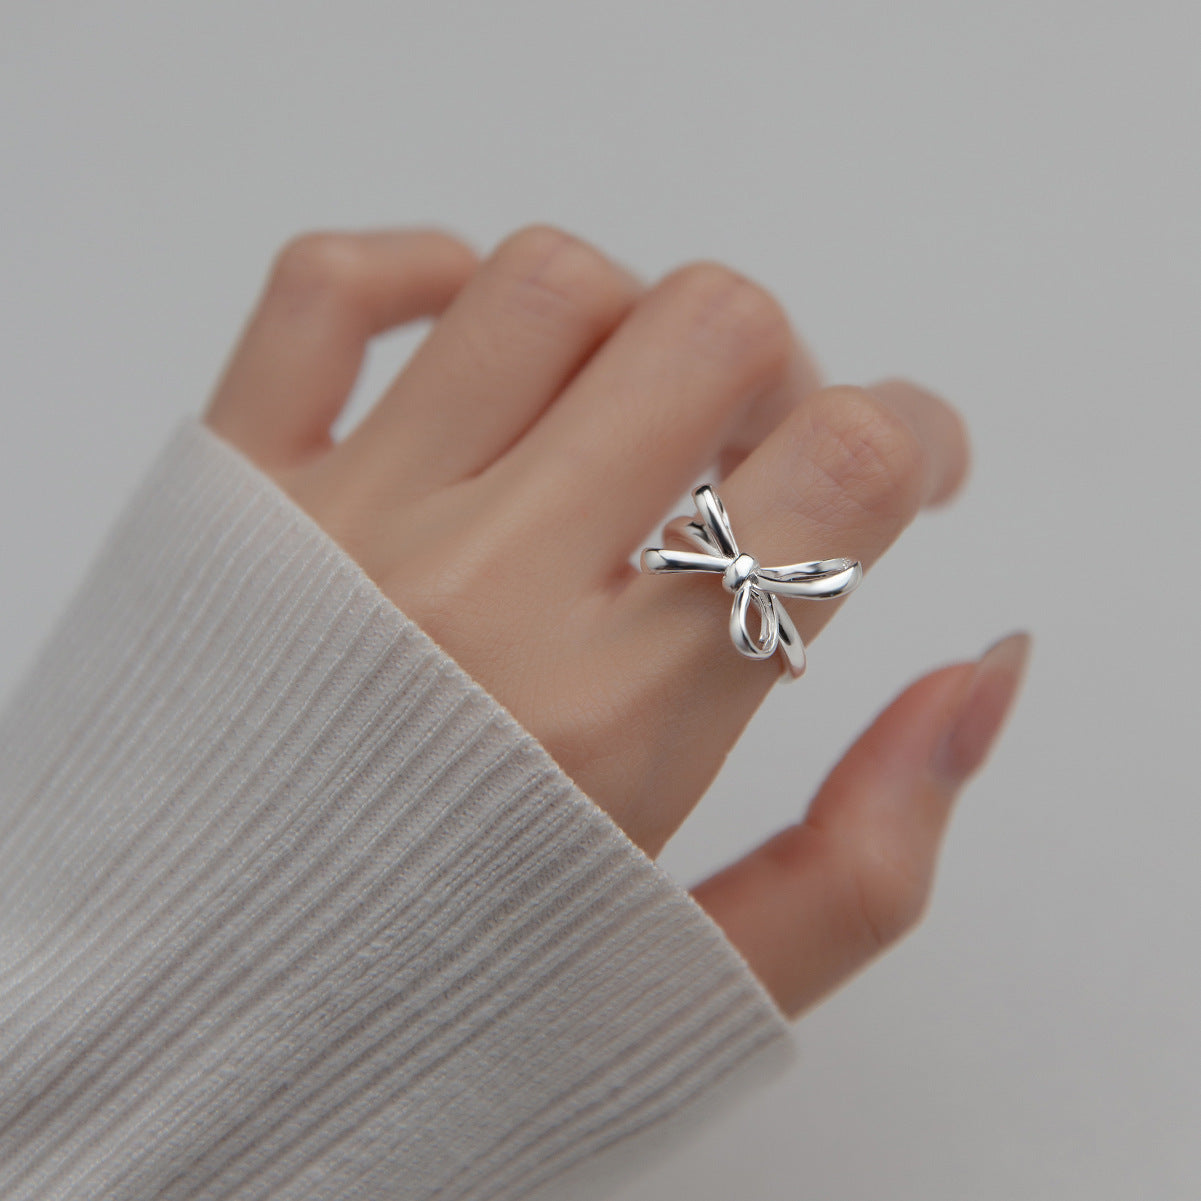 Shine with the S925 Silver Bow Ring – Fashionable Women's Jewelry